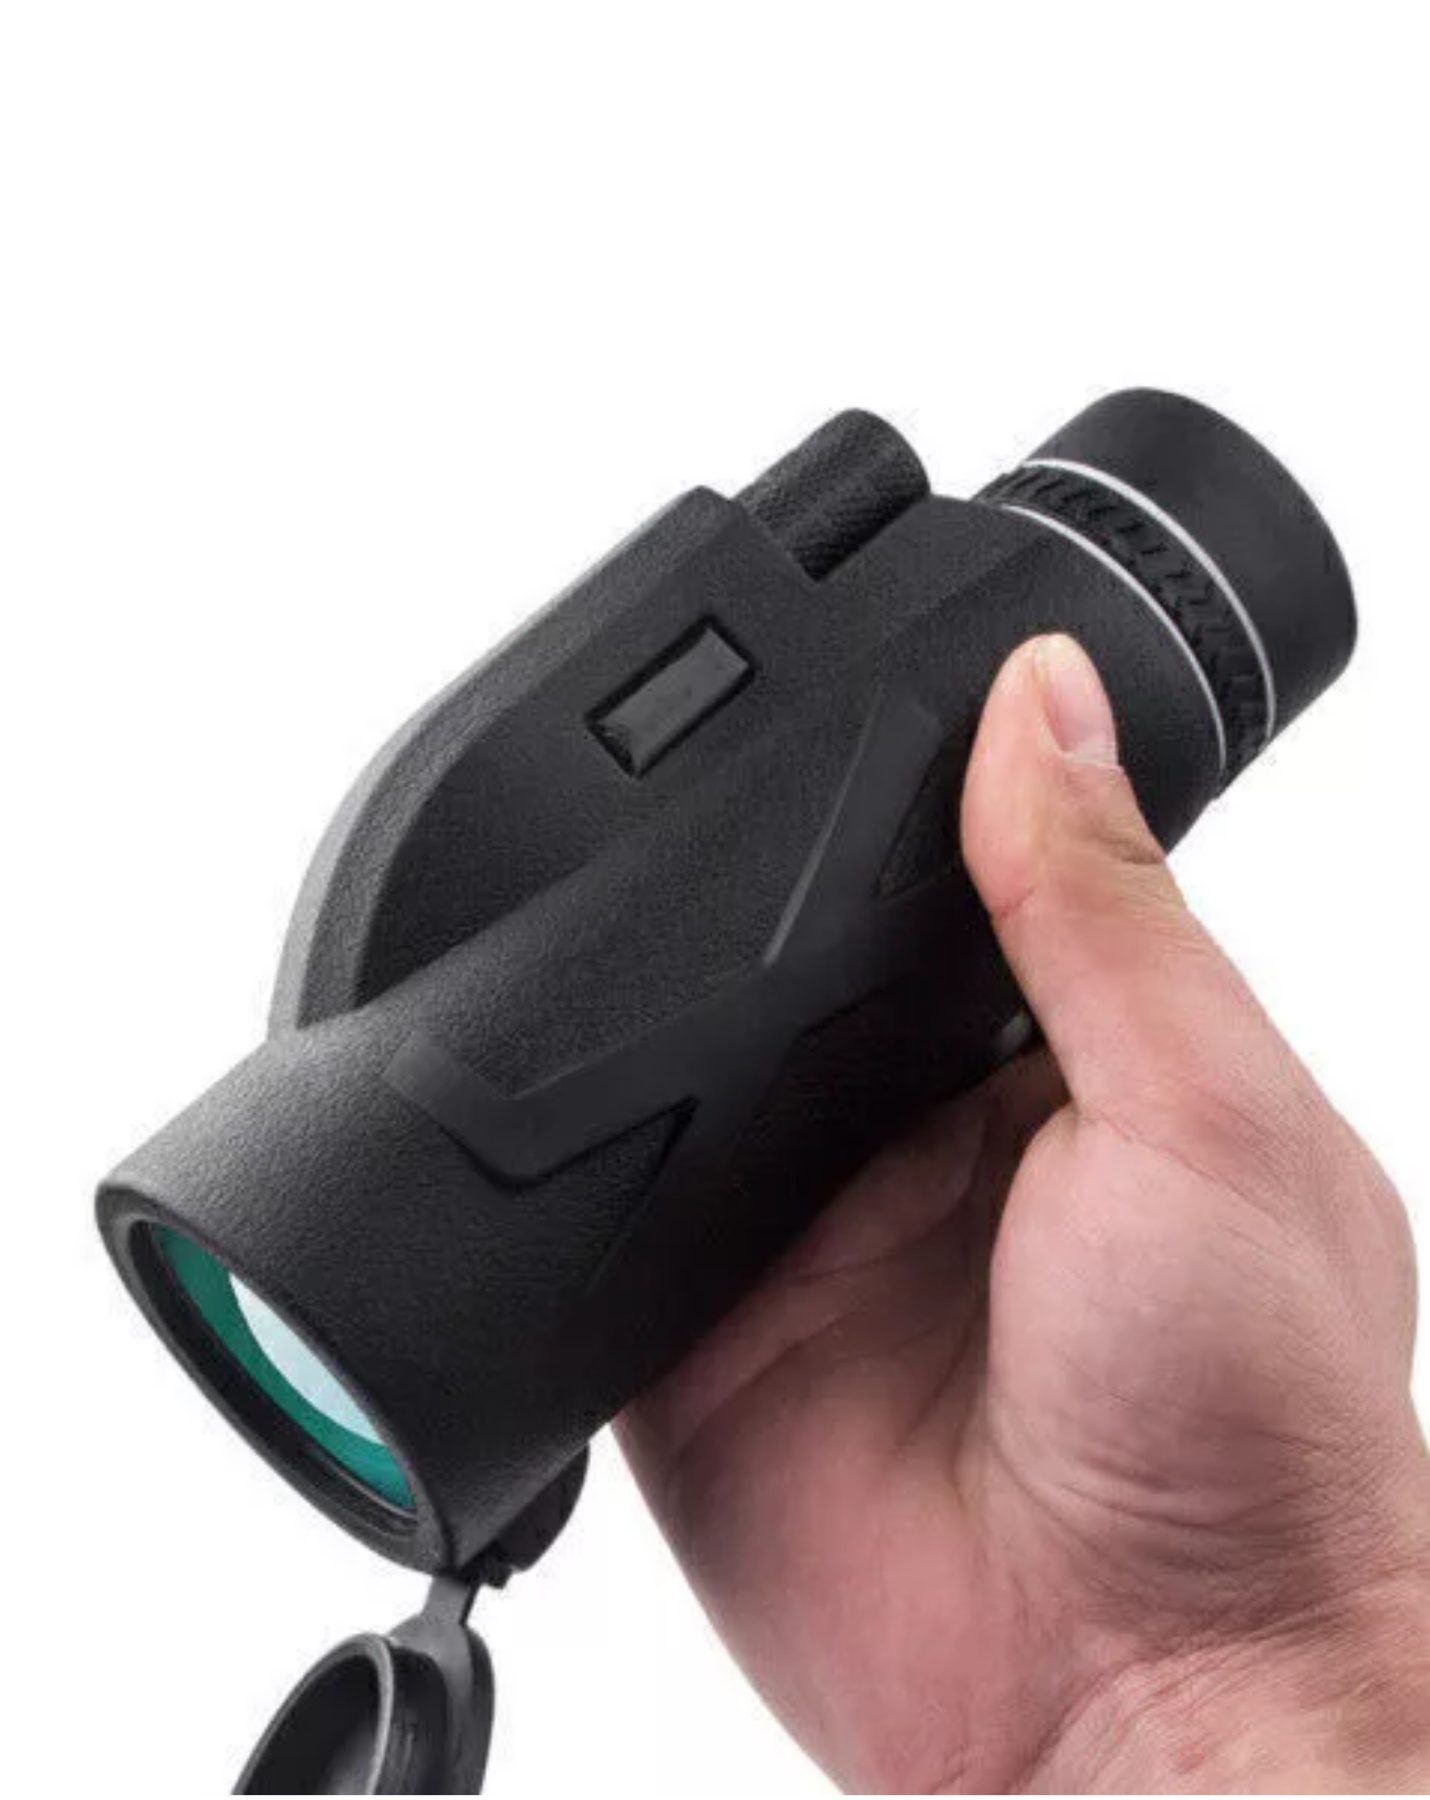 80x100 Monocular Super Zoom Telescope: With Tripod Stand, Phone Clip, Low-Light Night Vision, High Reflective Index, Six Core, & So Much More.